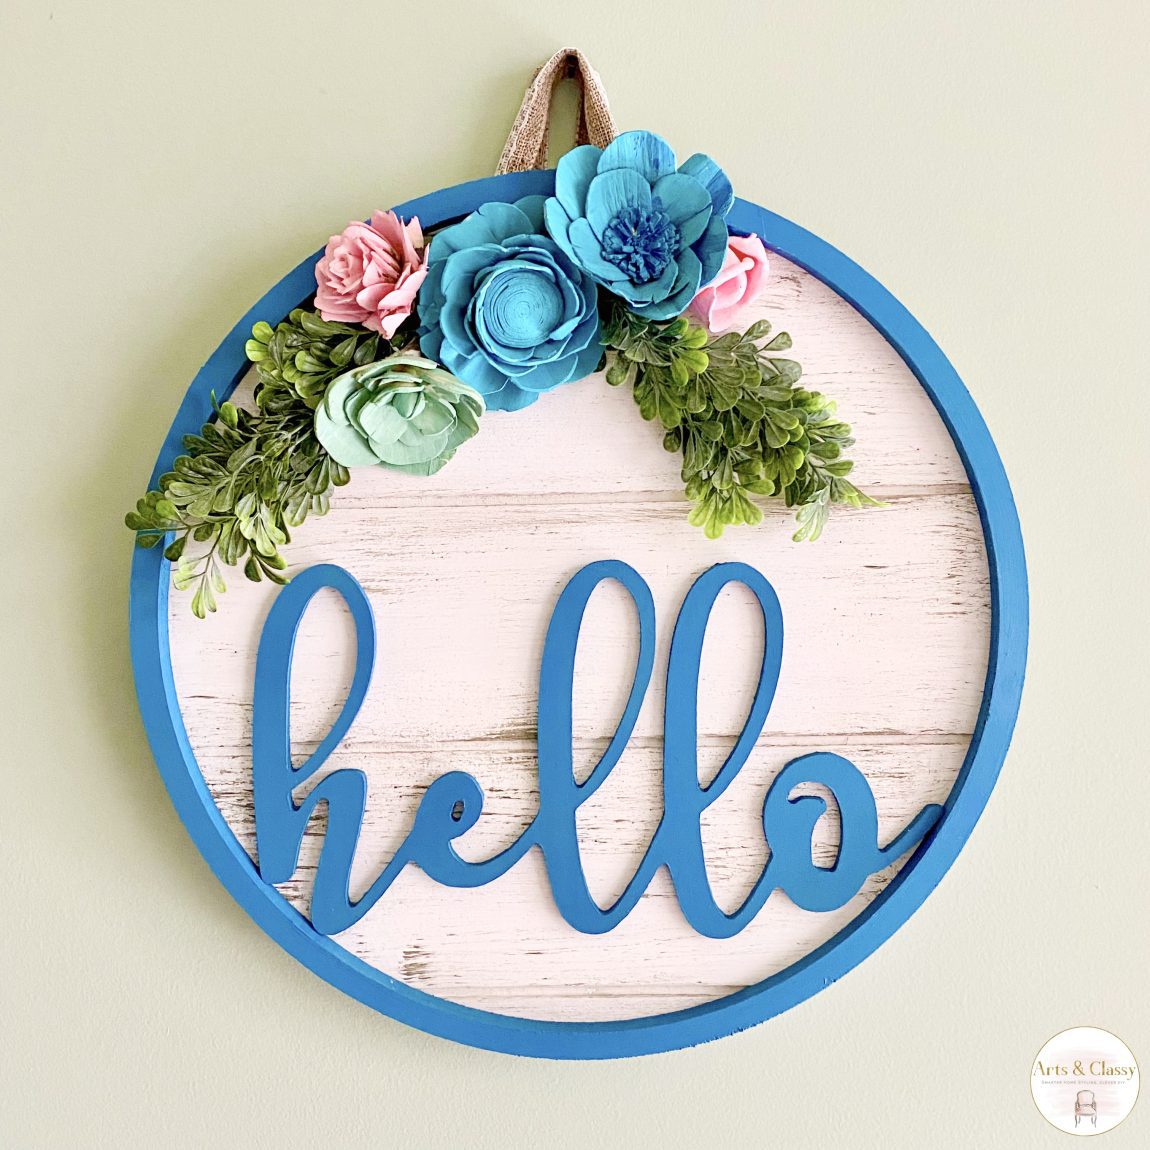 For springtime, why not add a little warmth to a home or office with a wood "Hello" door hanger? This cheerful decoration comes in bright colors and displays the timeless greeting in a bold and/or colorful font. 

It's easy to put up with just one nail or picture hanger and is sure to catch the eye of anyone who visits. These beautiful yet simple spring door decorations will make any home or office more inviting and welcoming, regardless if spring is in bloom or not.